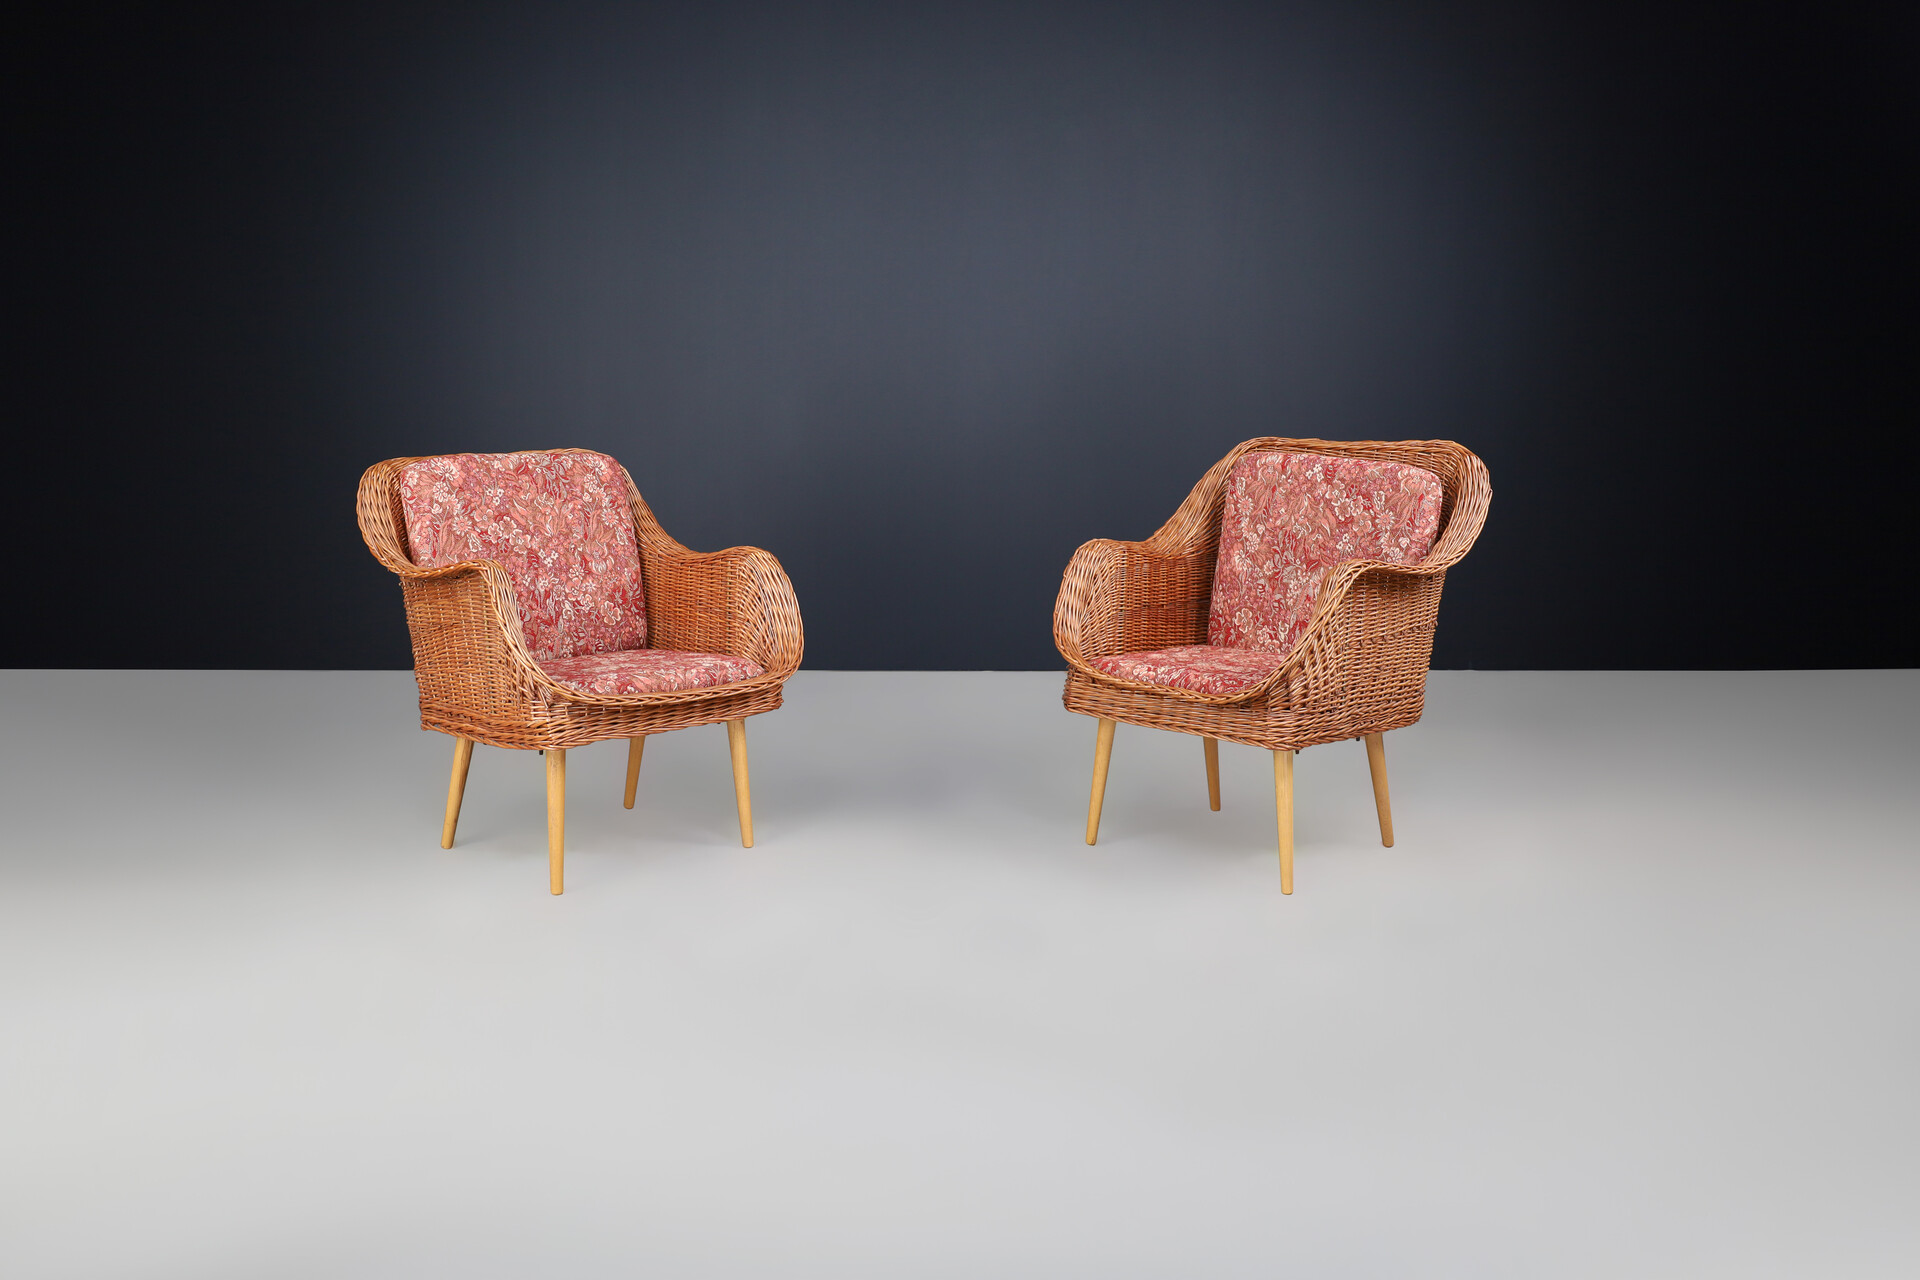 Mid century modern Rattan and wood armchairs, France 1950 Mid-20th century